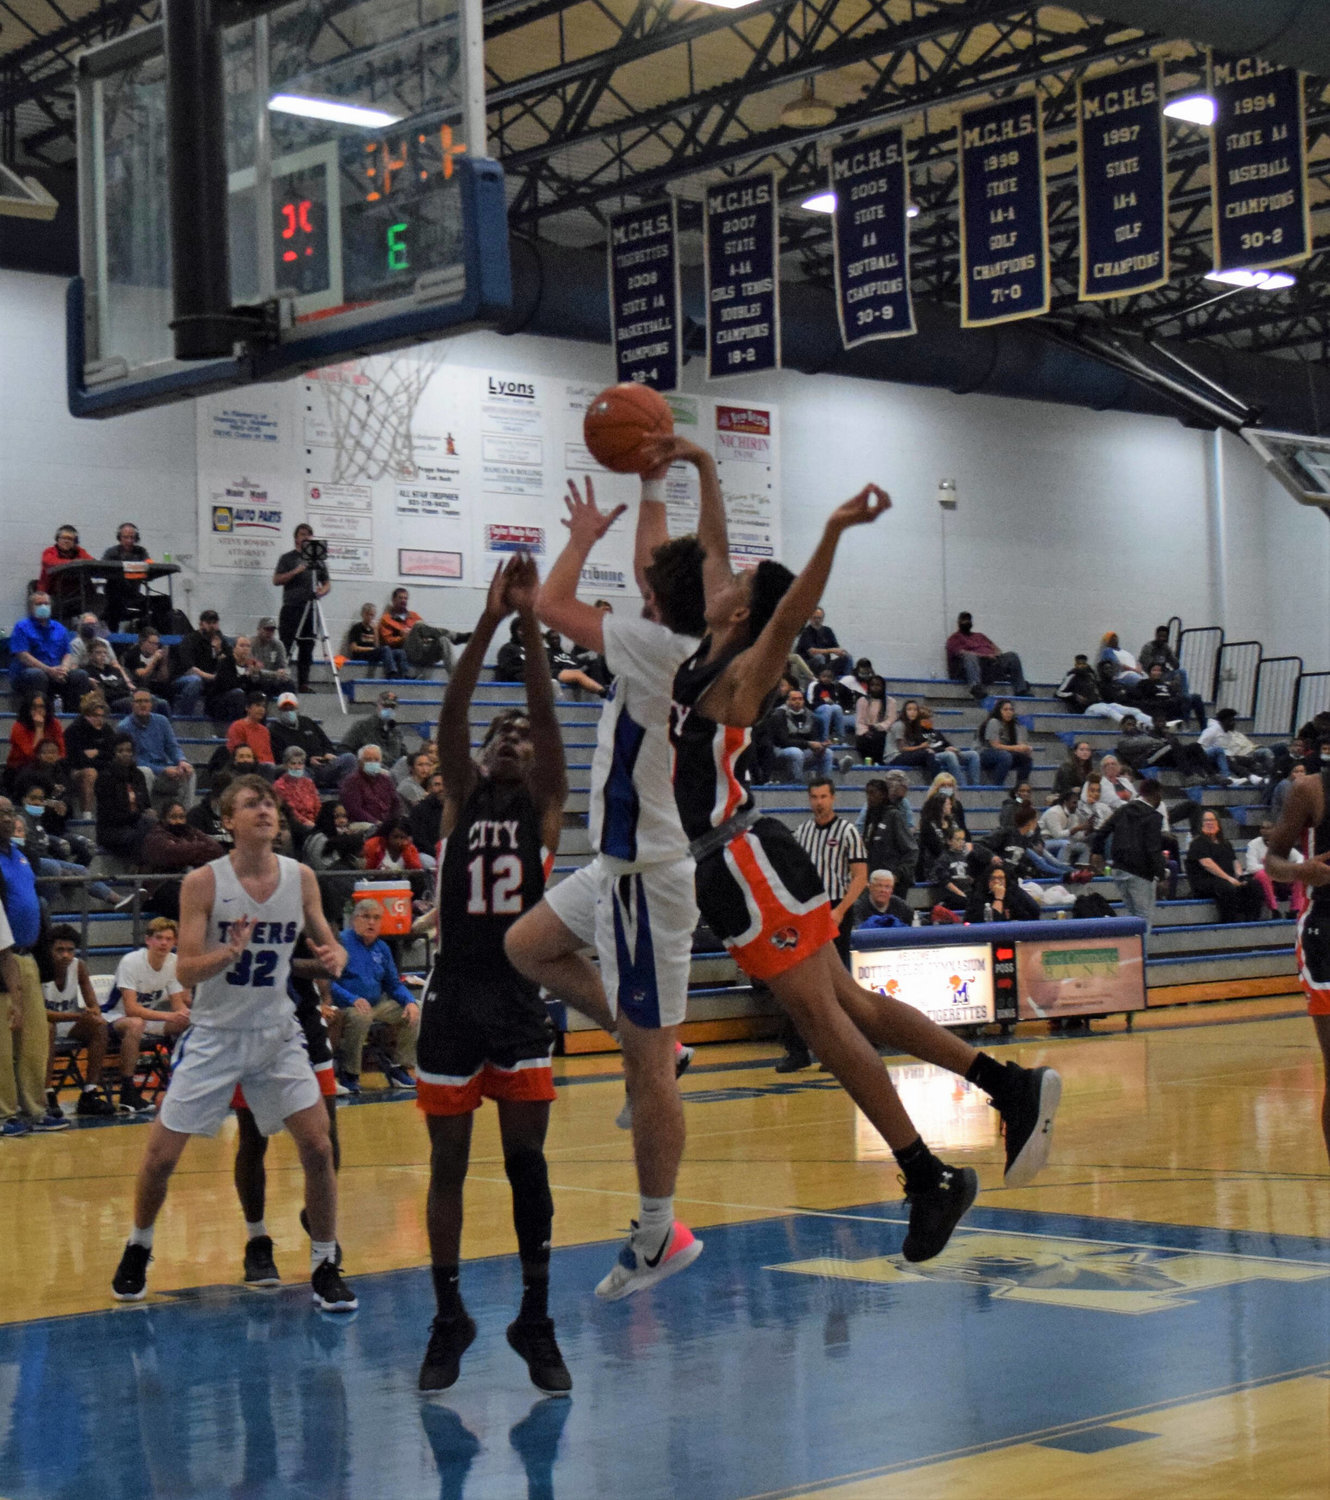 Marshall County senior Bryson Hughes goes up for two of his game-high 18 points in the Tigers’ first win of the season.